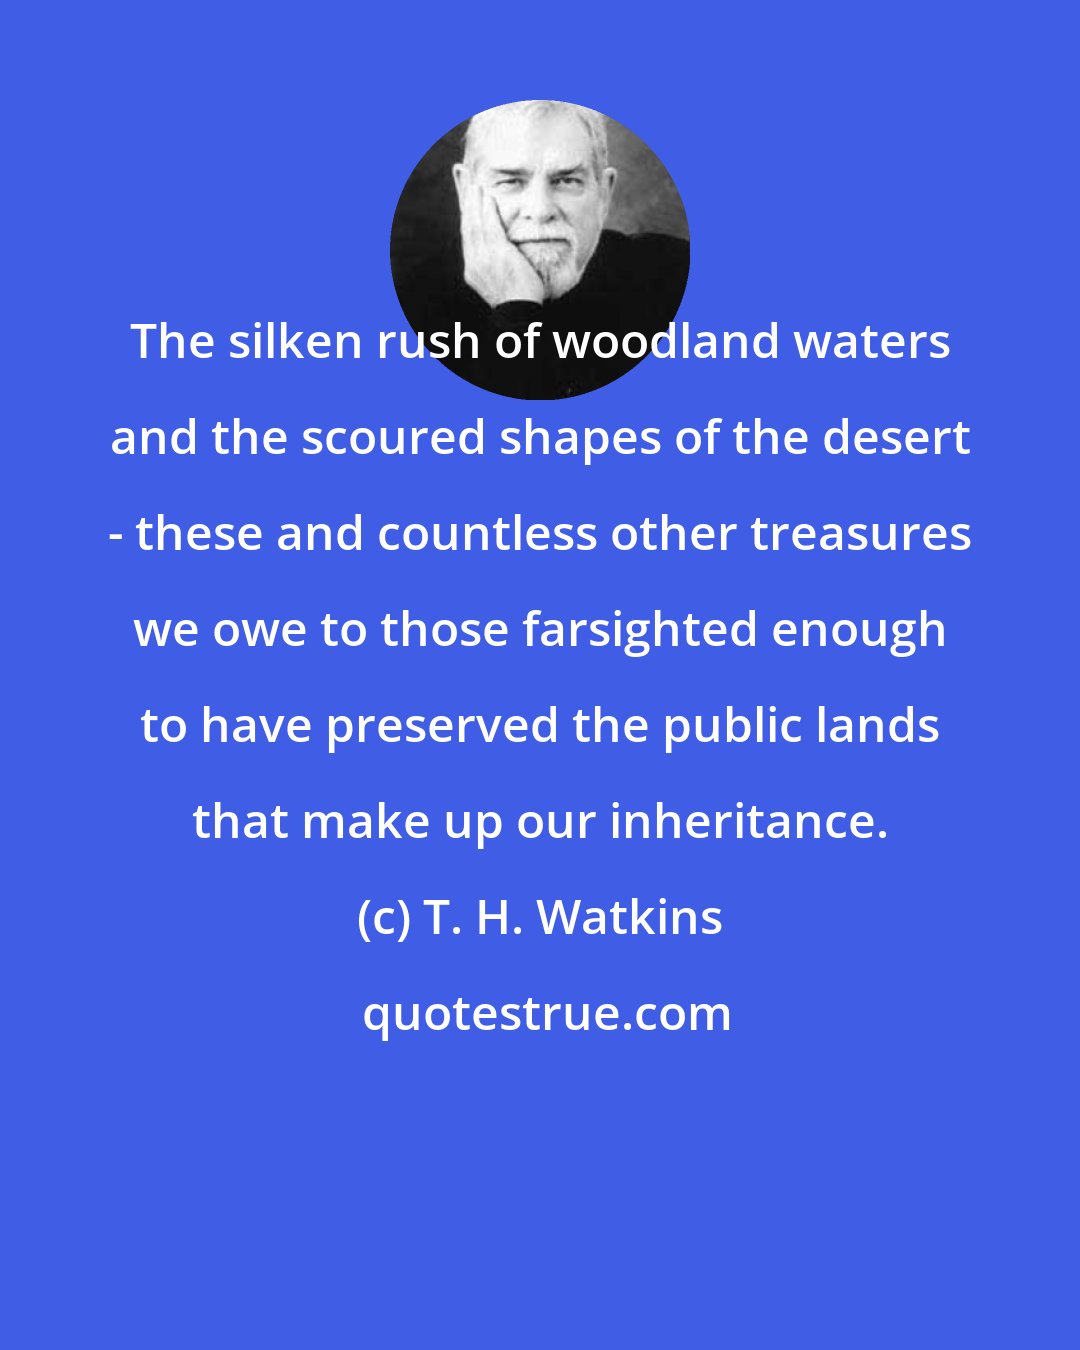 T. H. Watkins: The silken rush of woodland waters and the scoured shapes of the desert - these and countless other treasures we owe to those farsighted enough to have preserved the public lands that make up our inheritance.